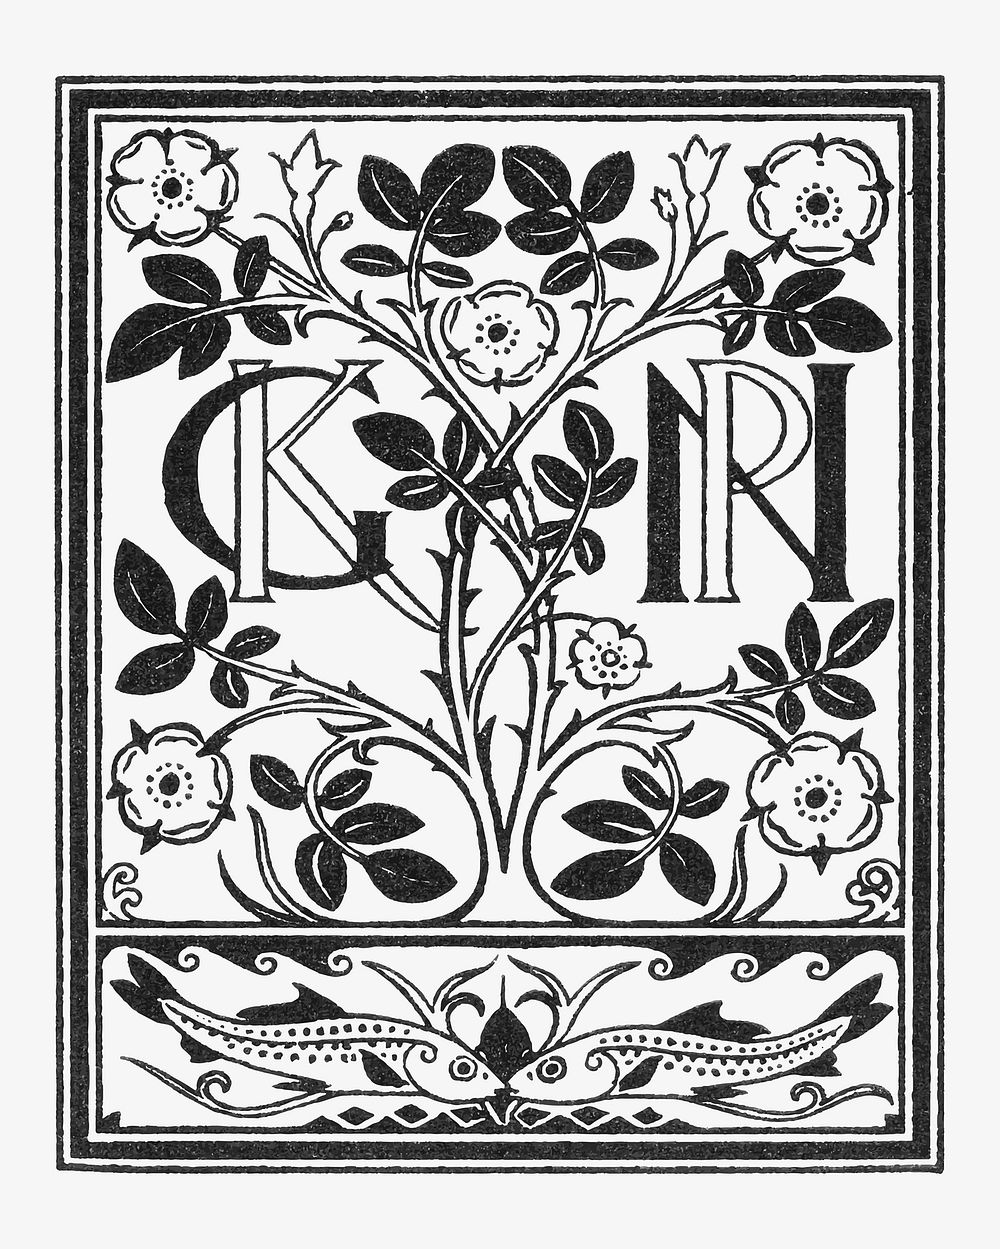 Book cover vector with vintage letters and flowers, remixed from artworks by Gerrit Willem Dijsselhof